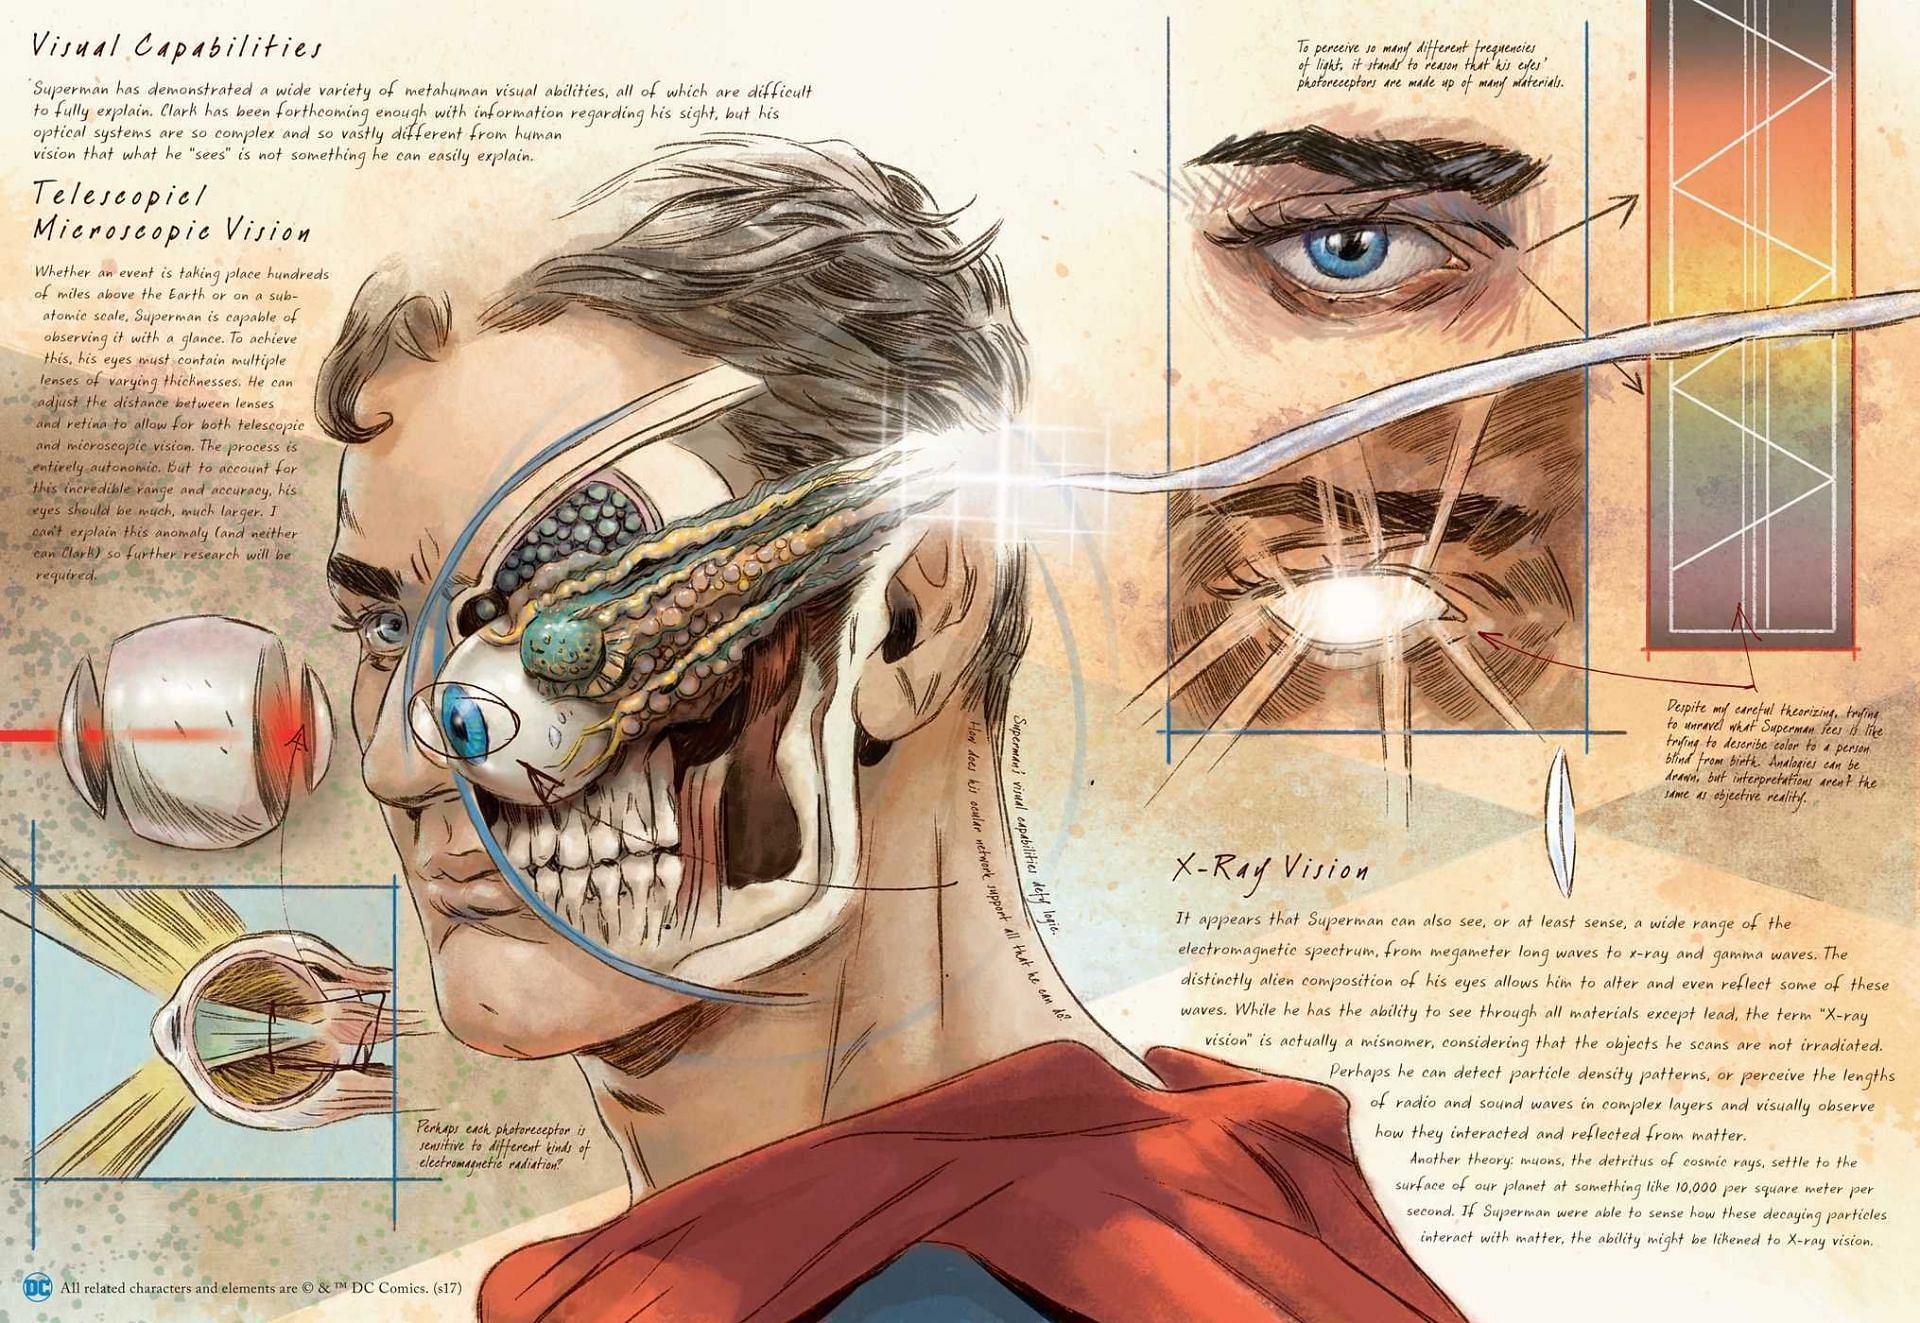 A page from the book (Image via DC Comics)